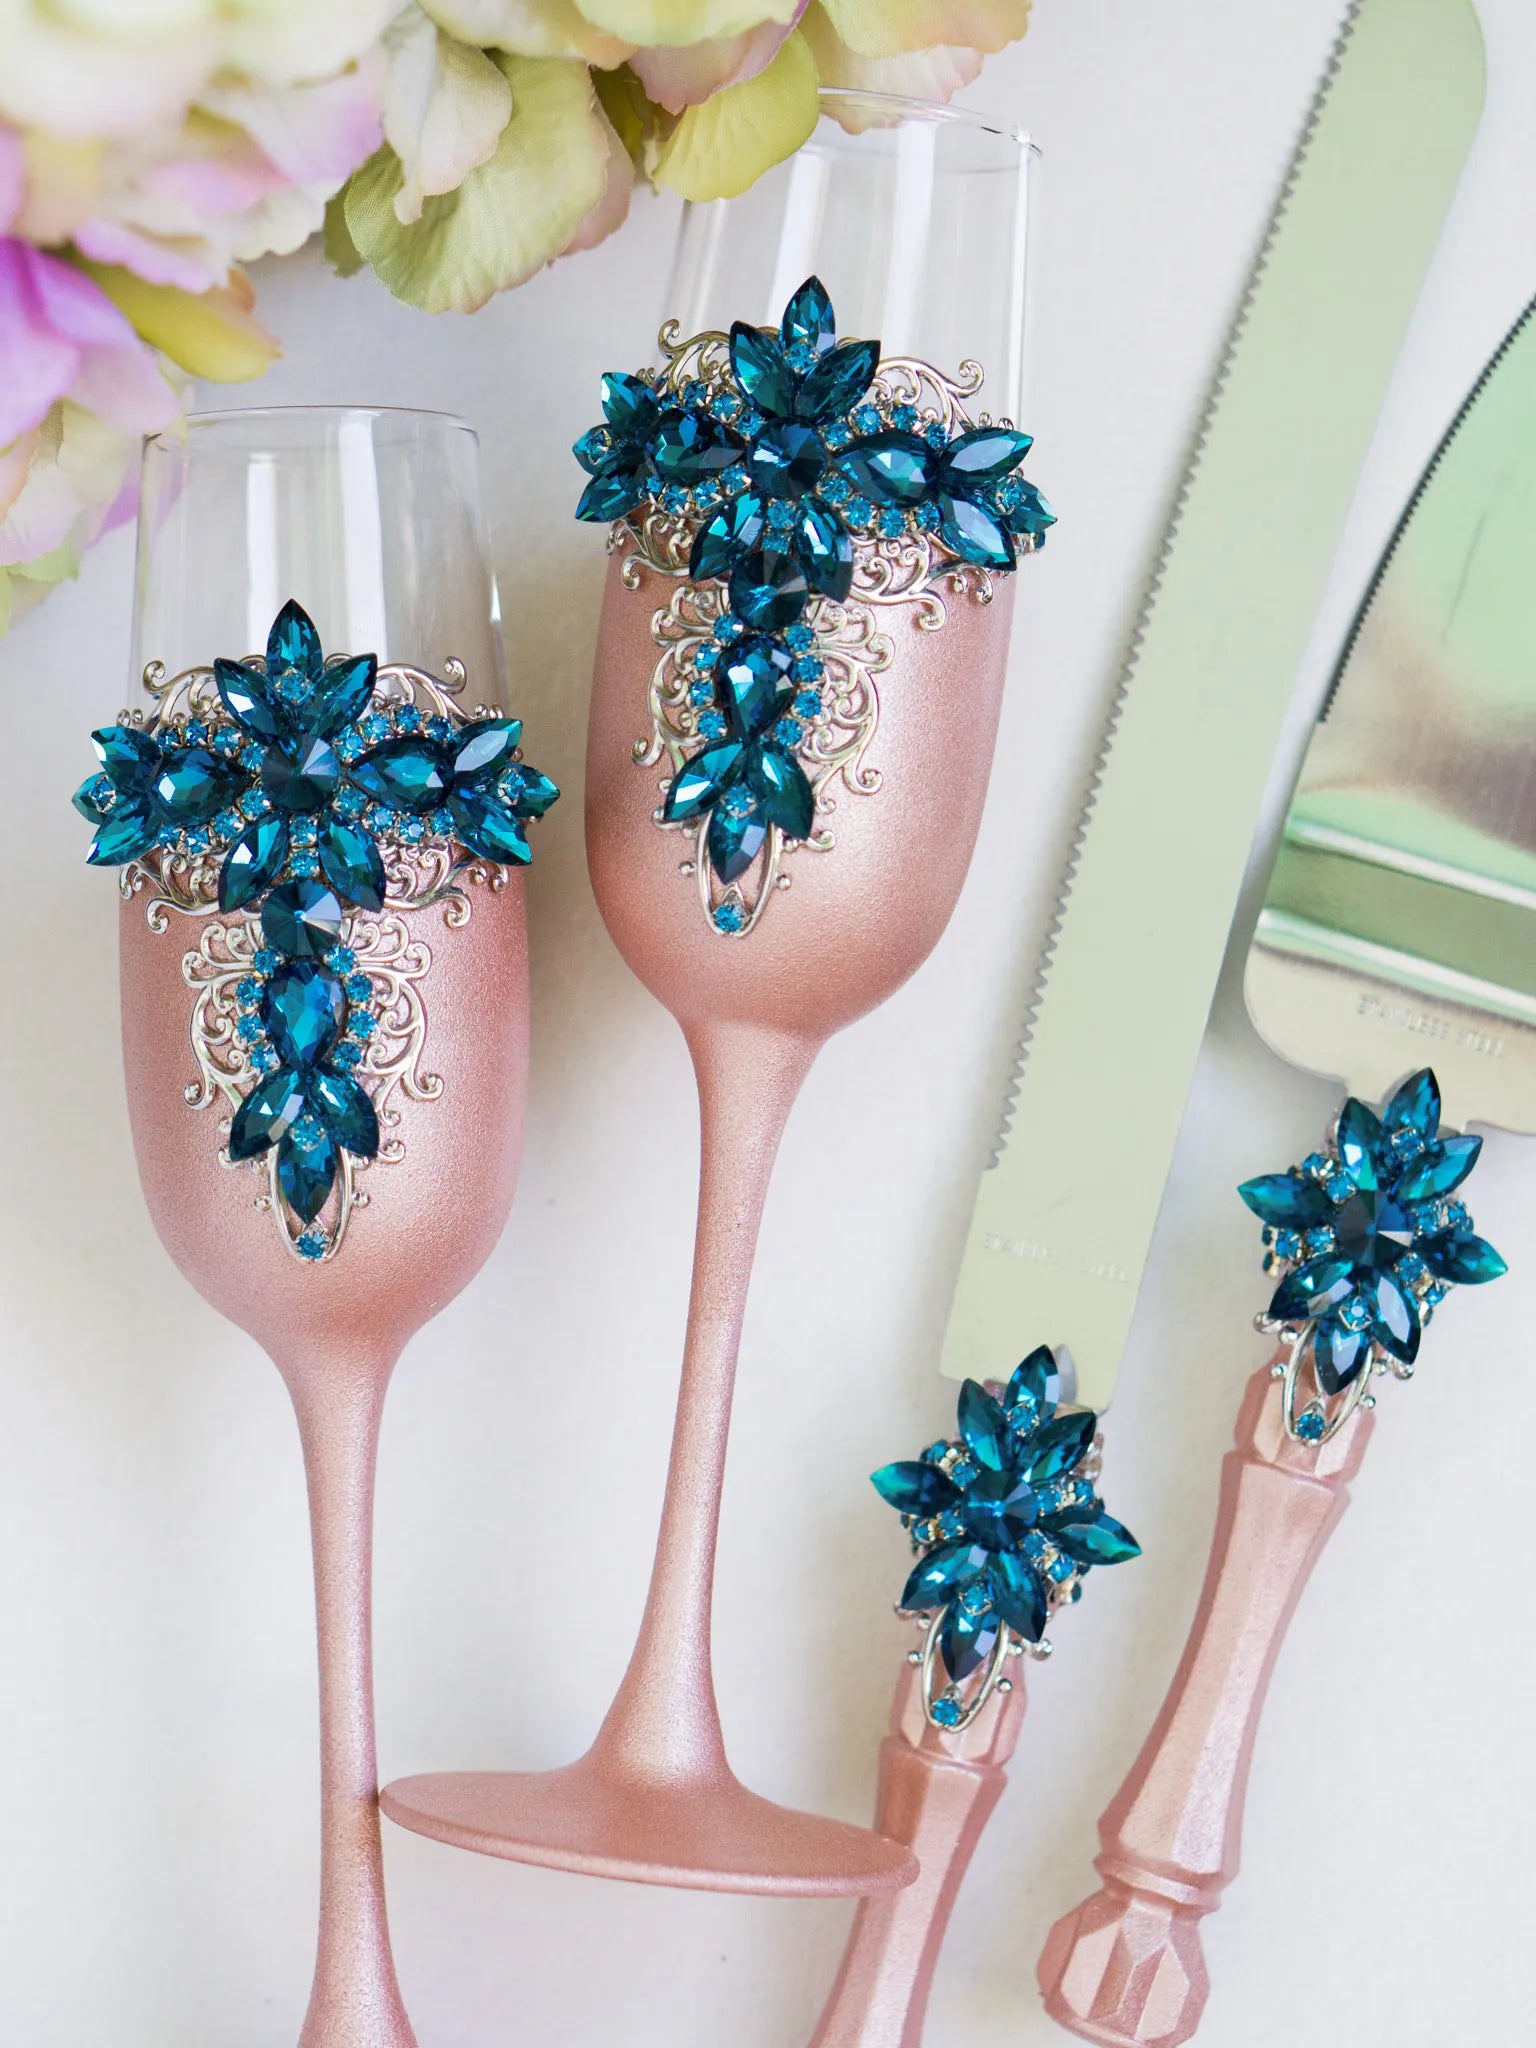 Wedding flutes adorned with blue teal crystals